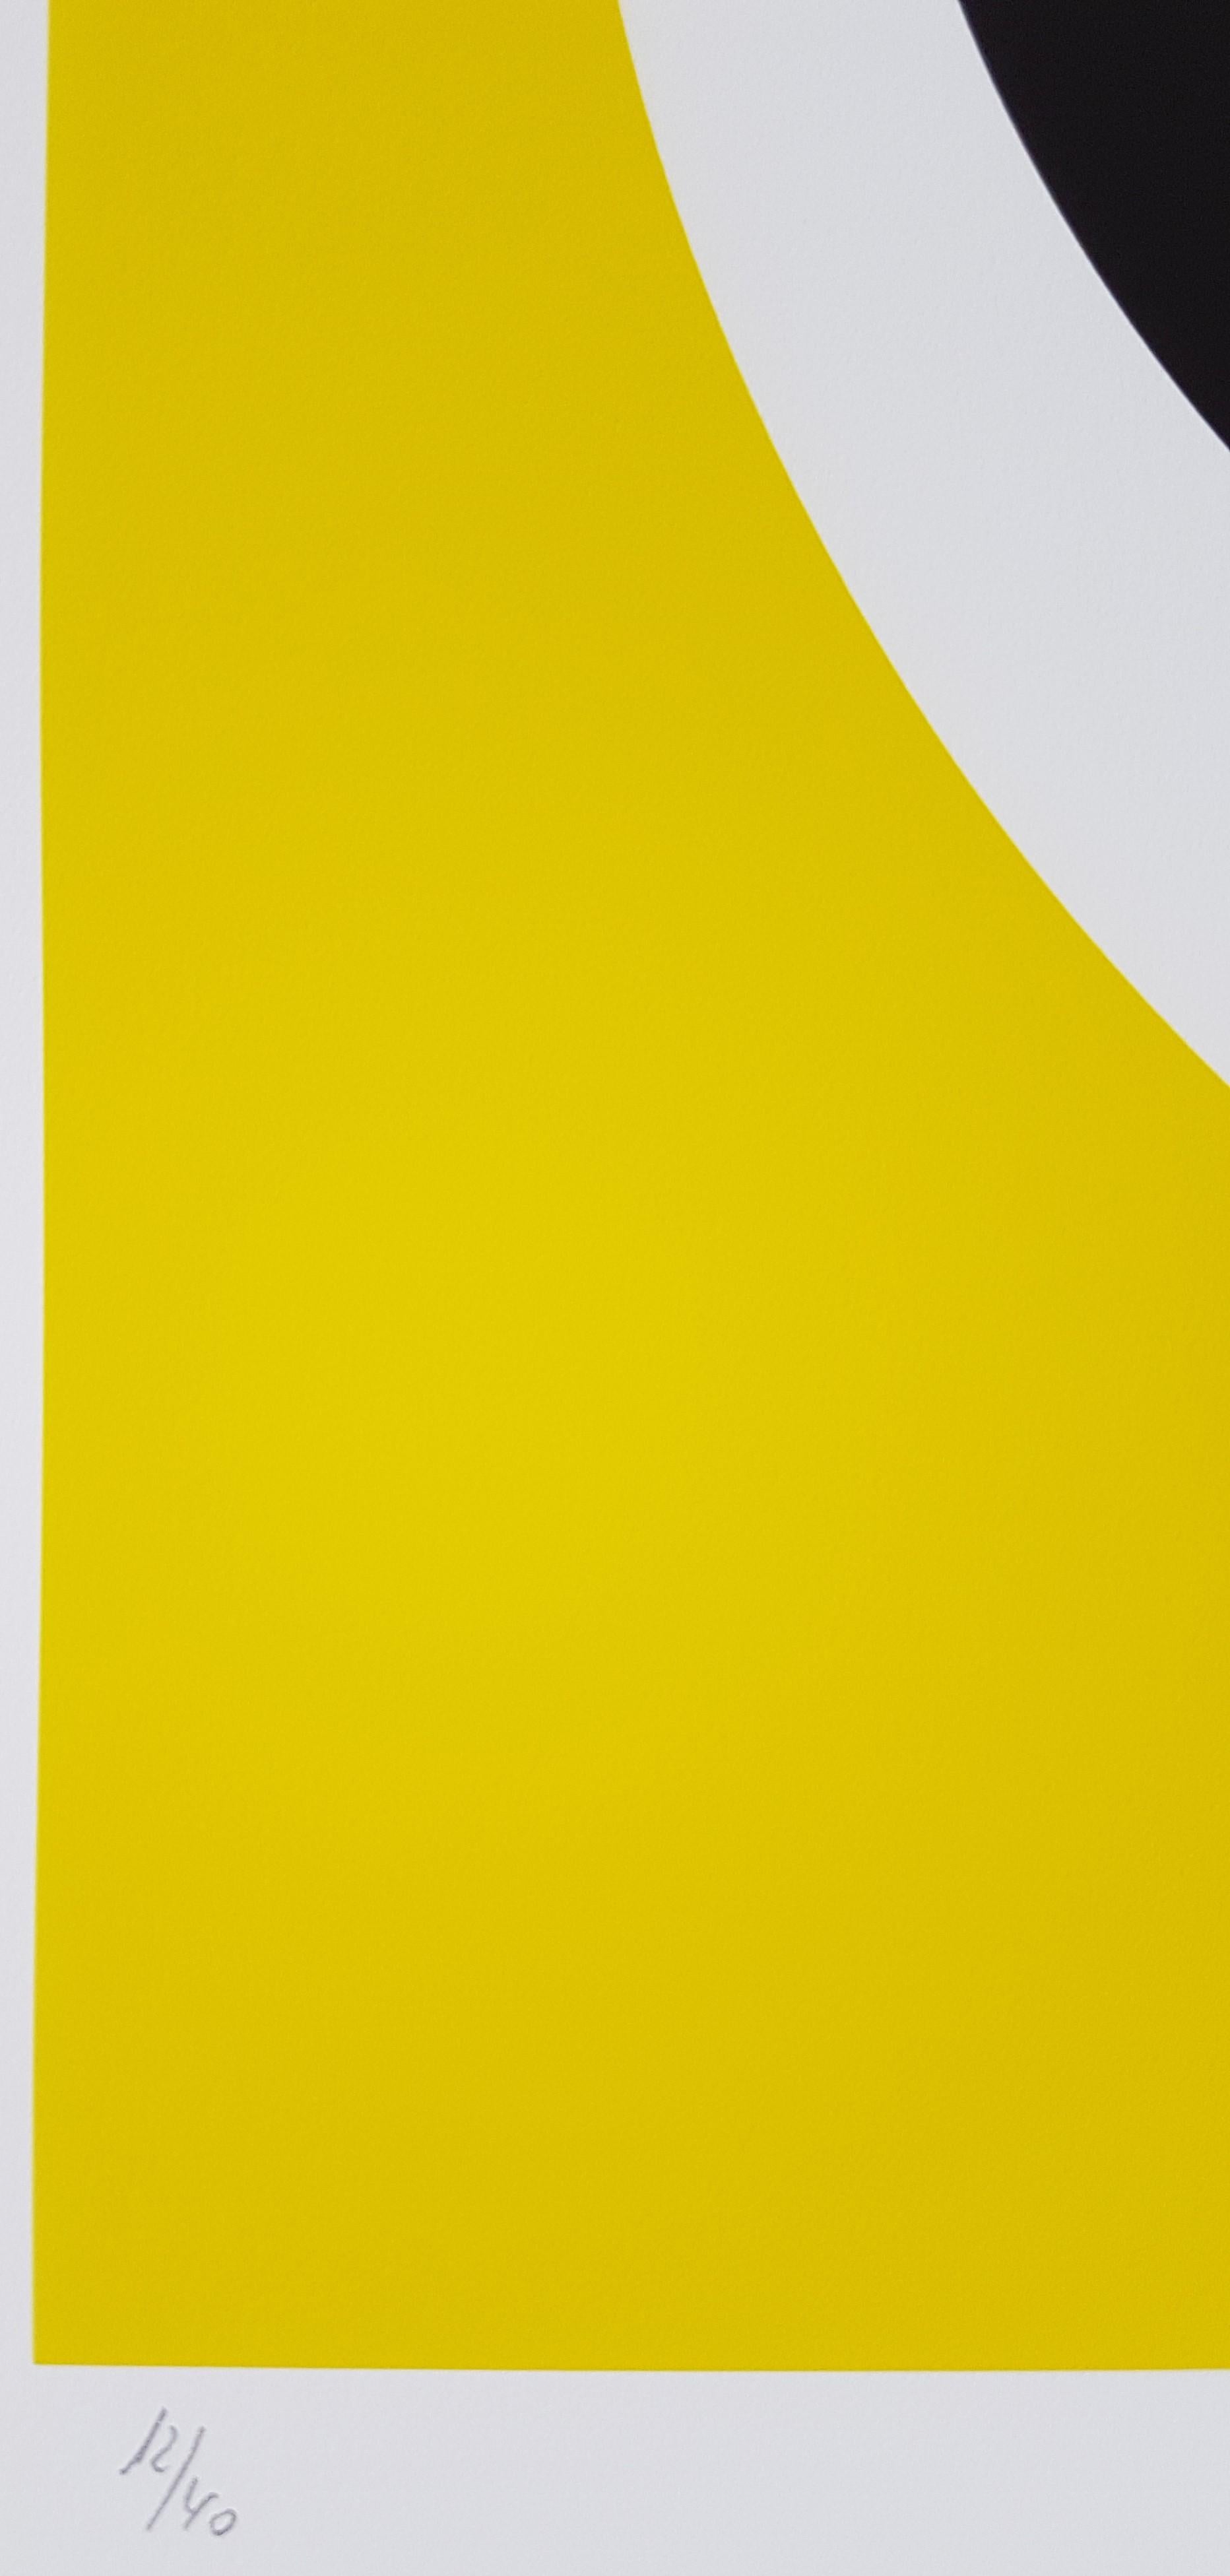 Yellow Circle (Cercle jaune) (Minimalism, Geometric Abstraction, Albers) - Contemporary Print by Geneviève Claisse